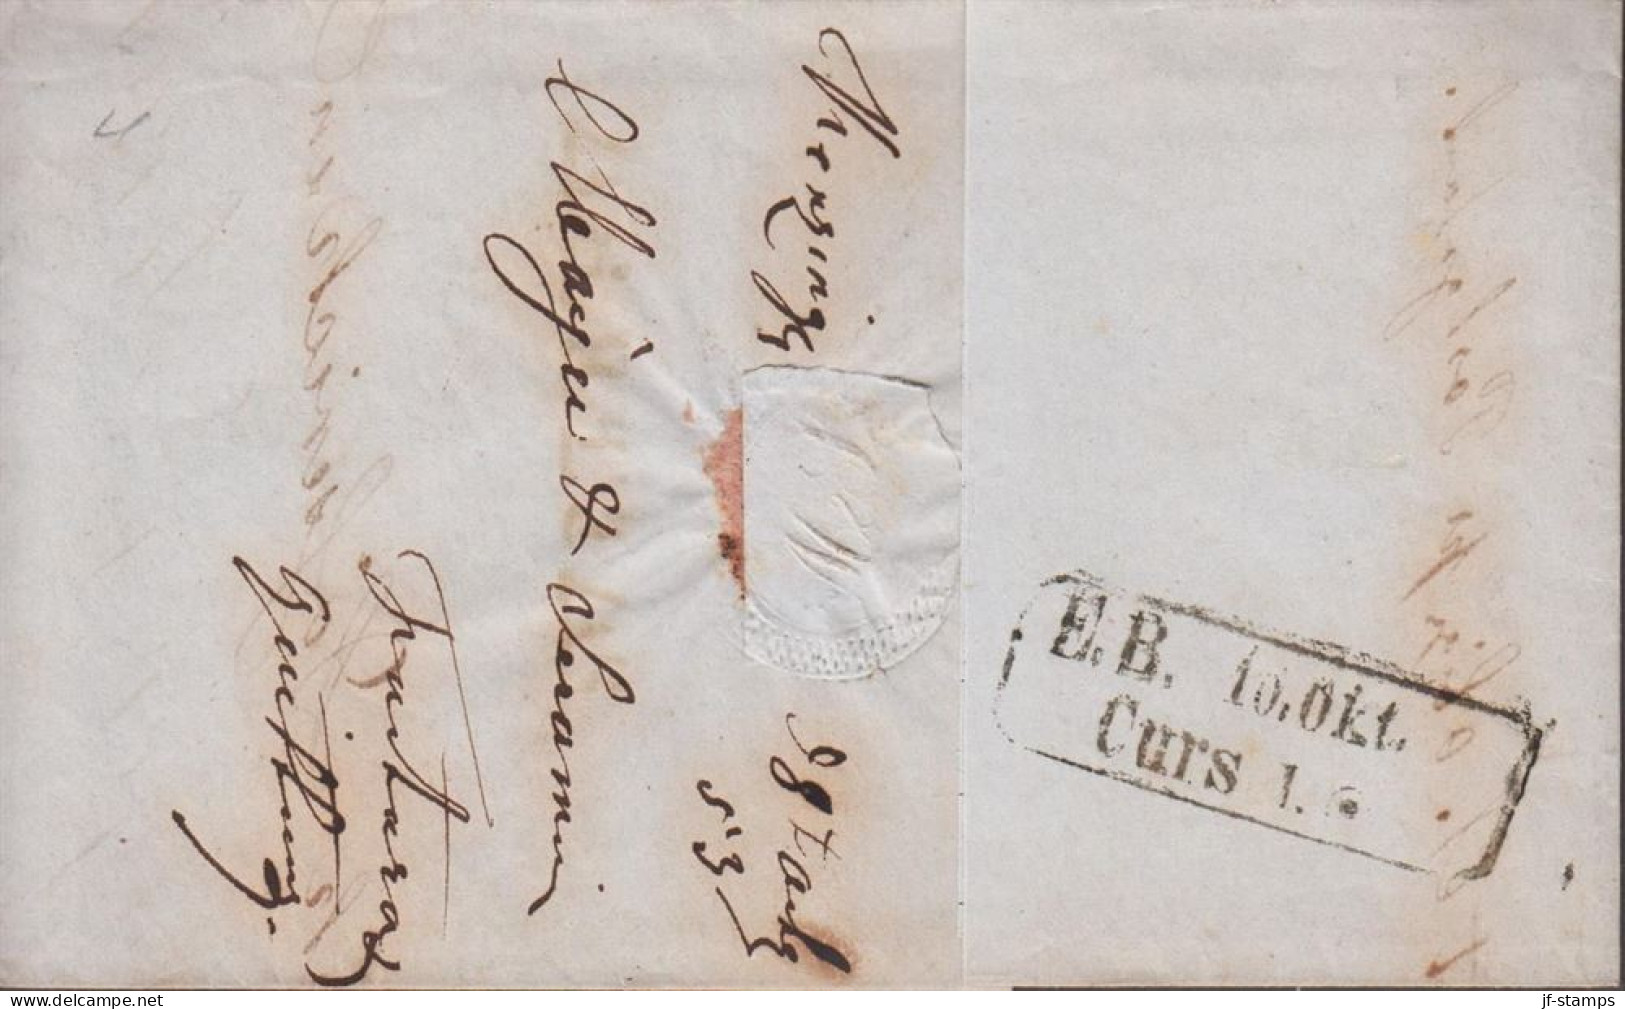 1853. BADEN. Ziffer Im Kreis. 3 Kr. On Fine Small Envelope To Huttingen Cancelled With Nummeral Cancel And... - JF535876 - Covers & Documents